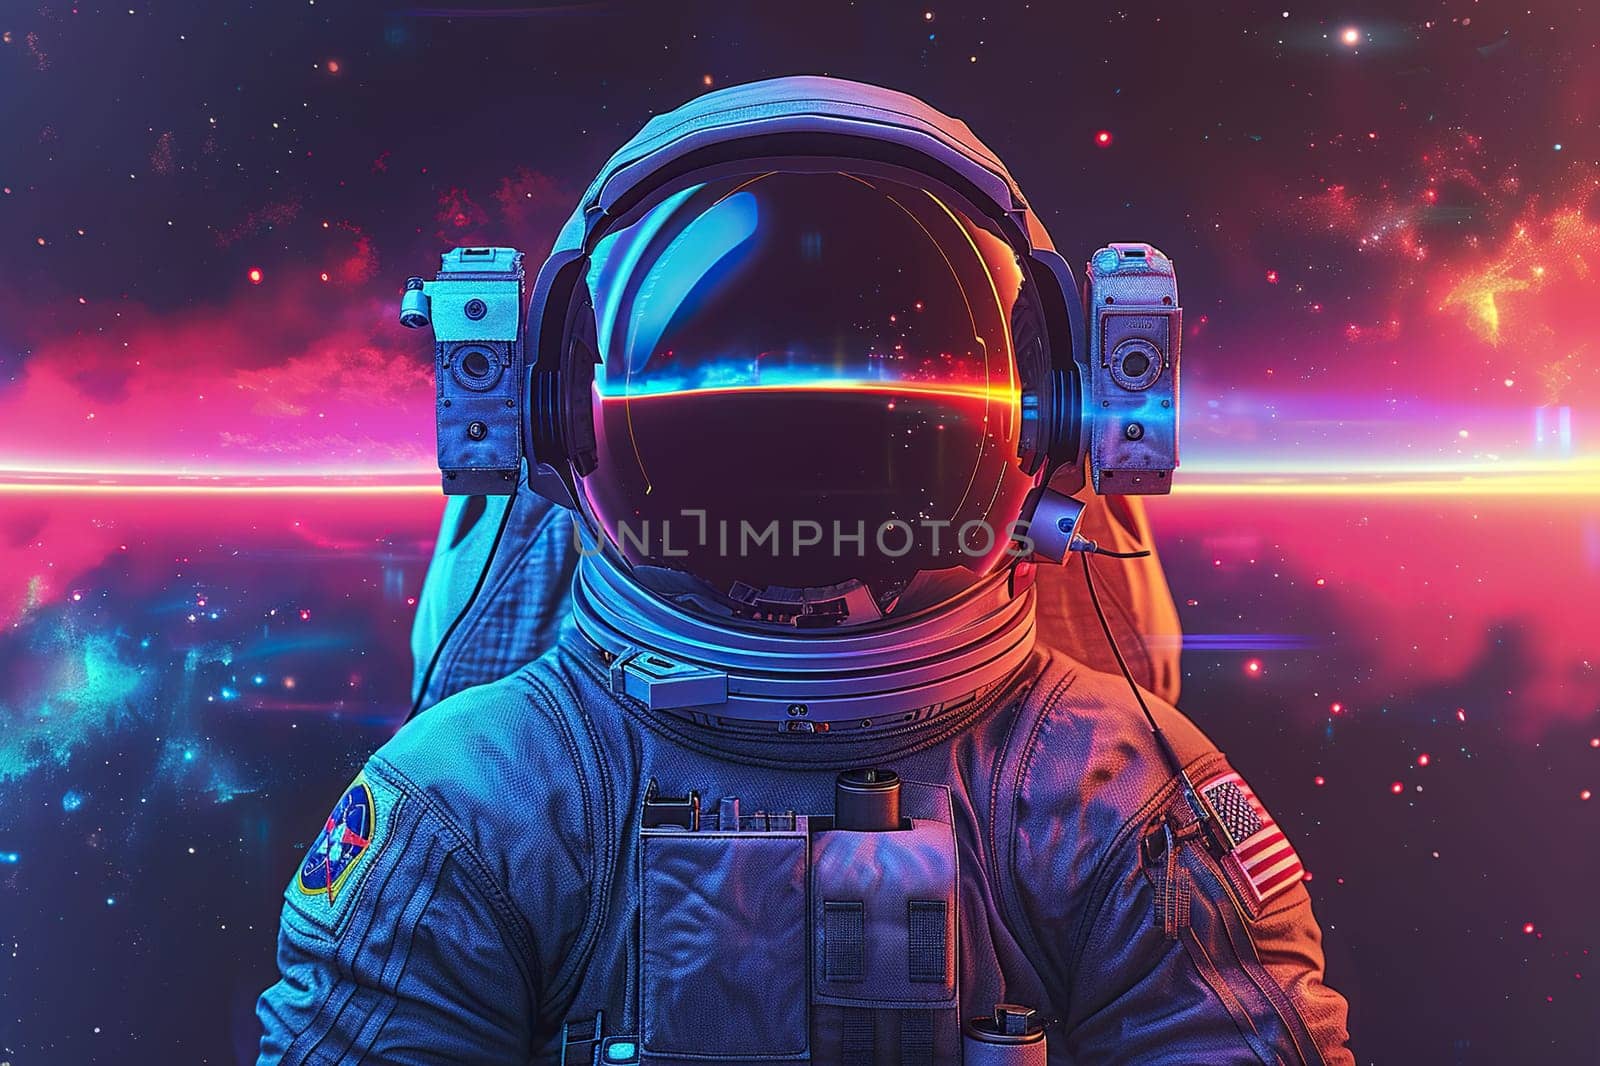 An astronaut in a spacesuit and large headphones against the backdrop of the universe.